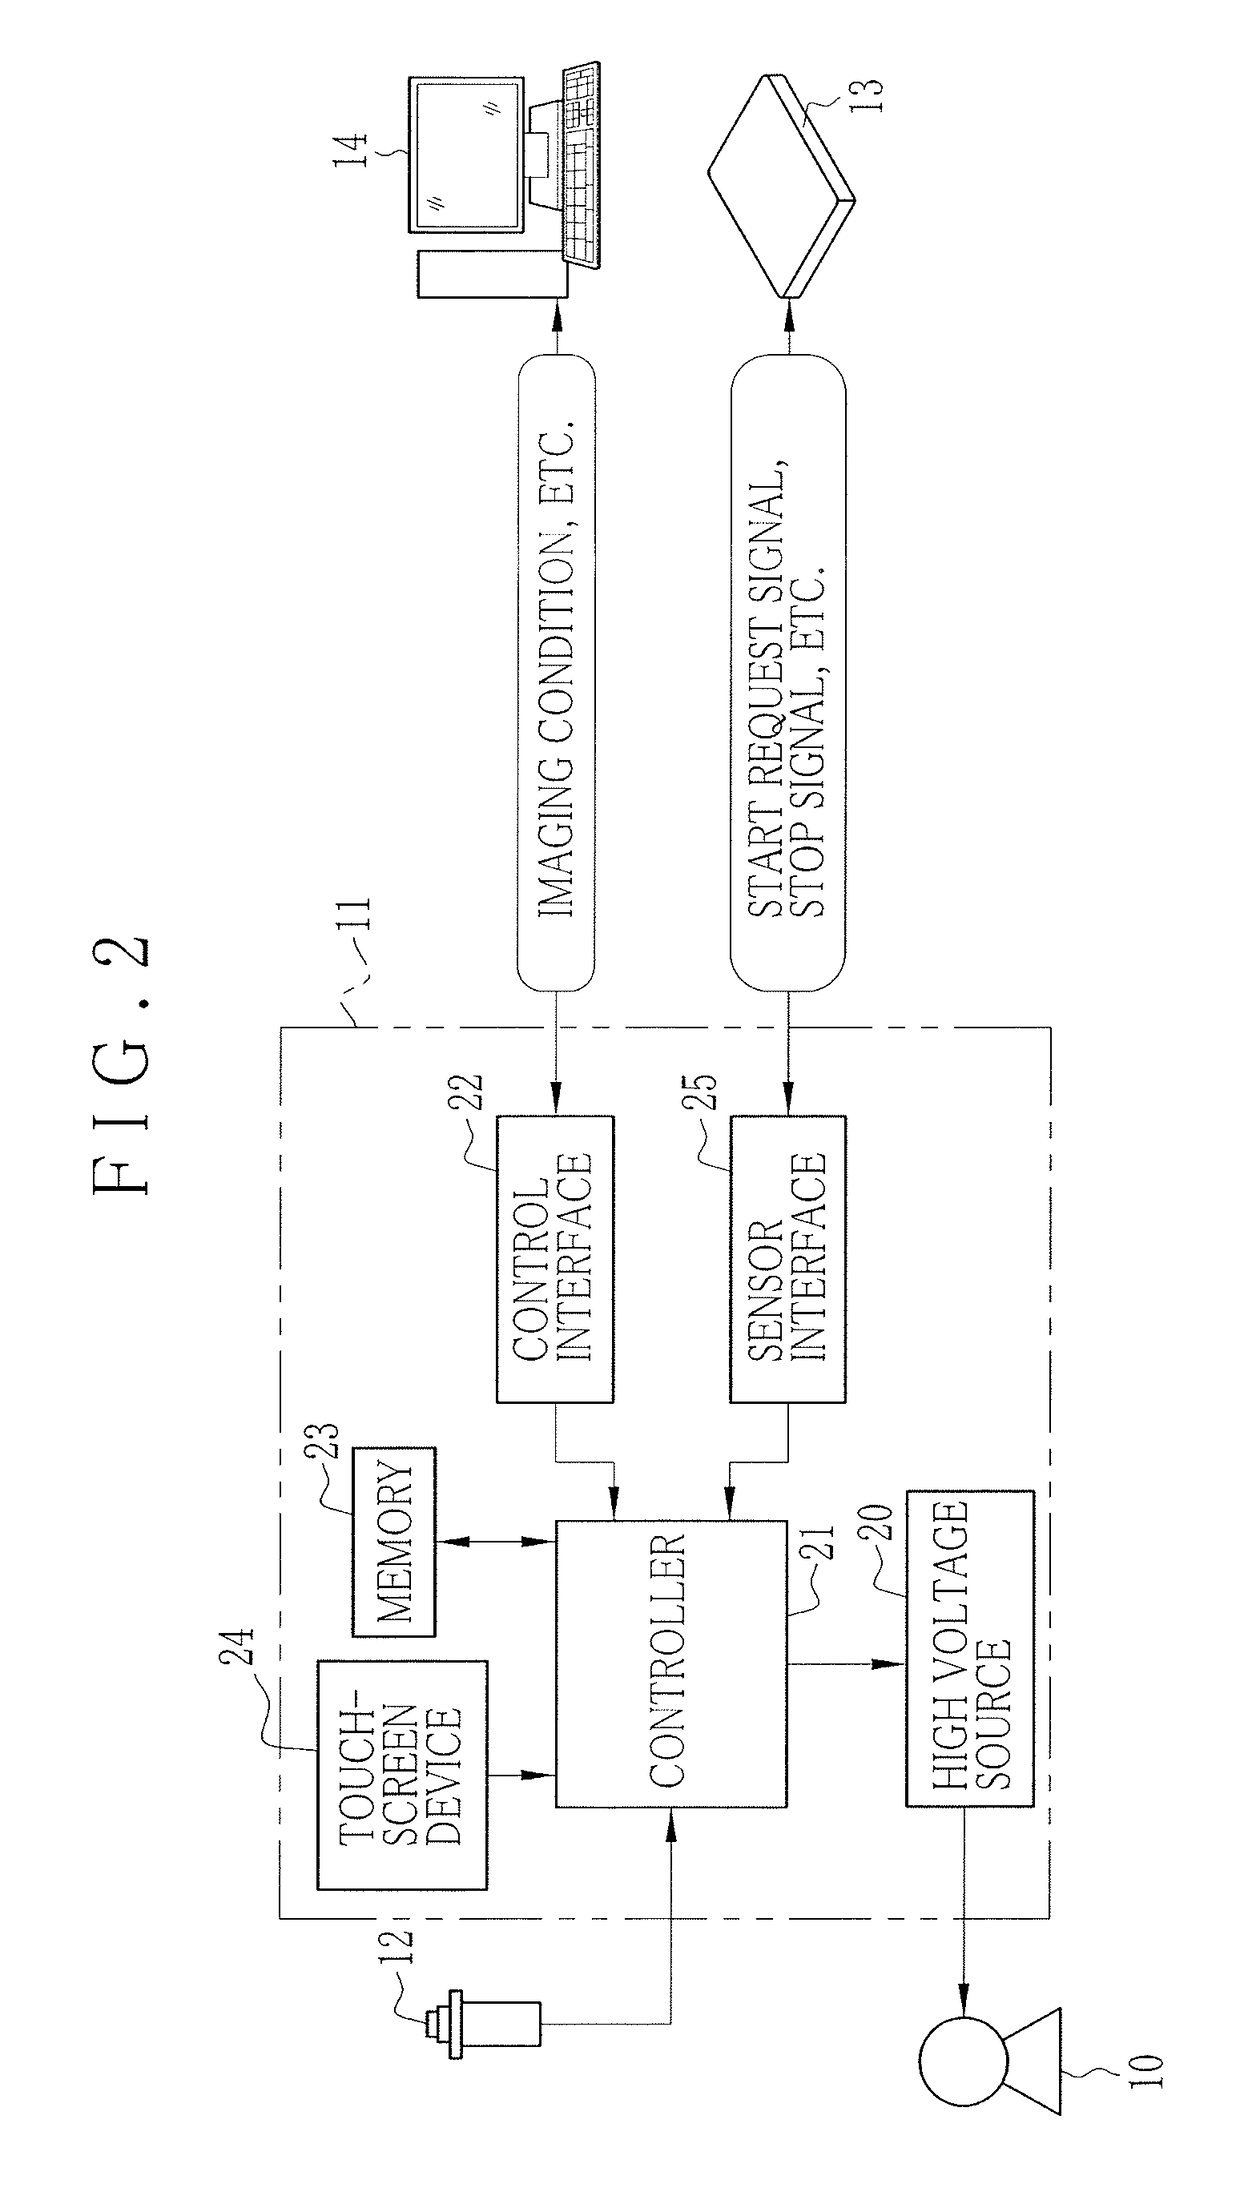 Radiographic imaging apparatus, method and system